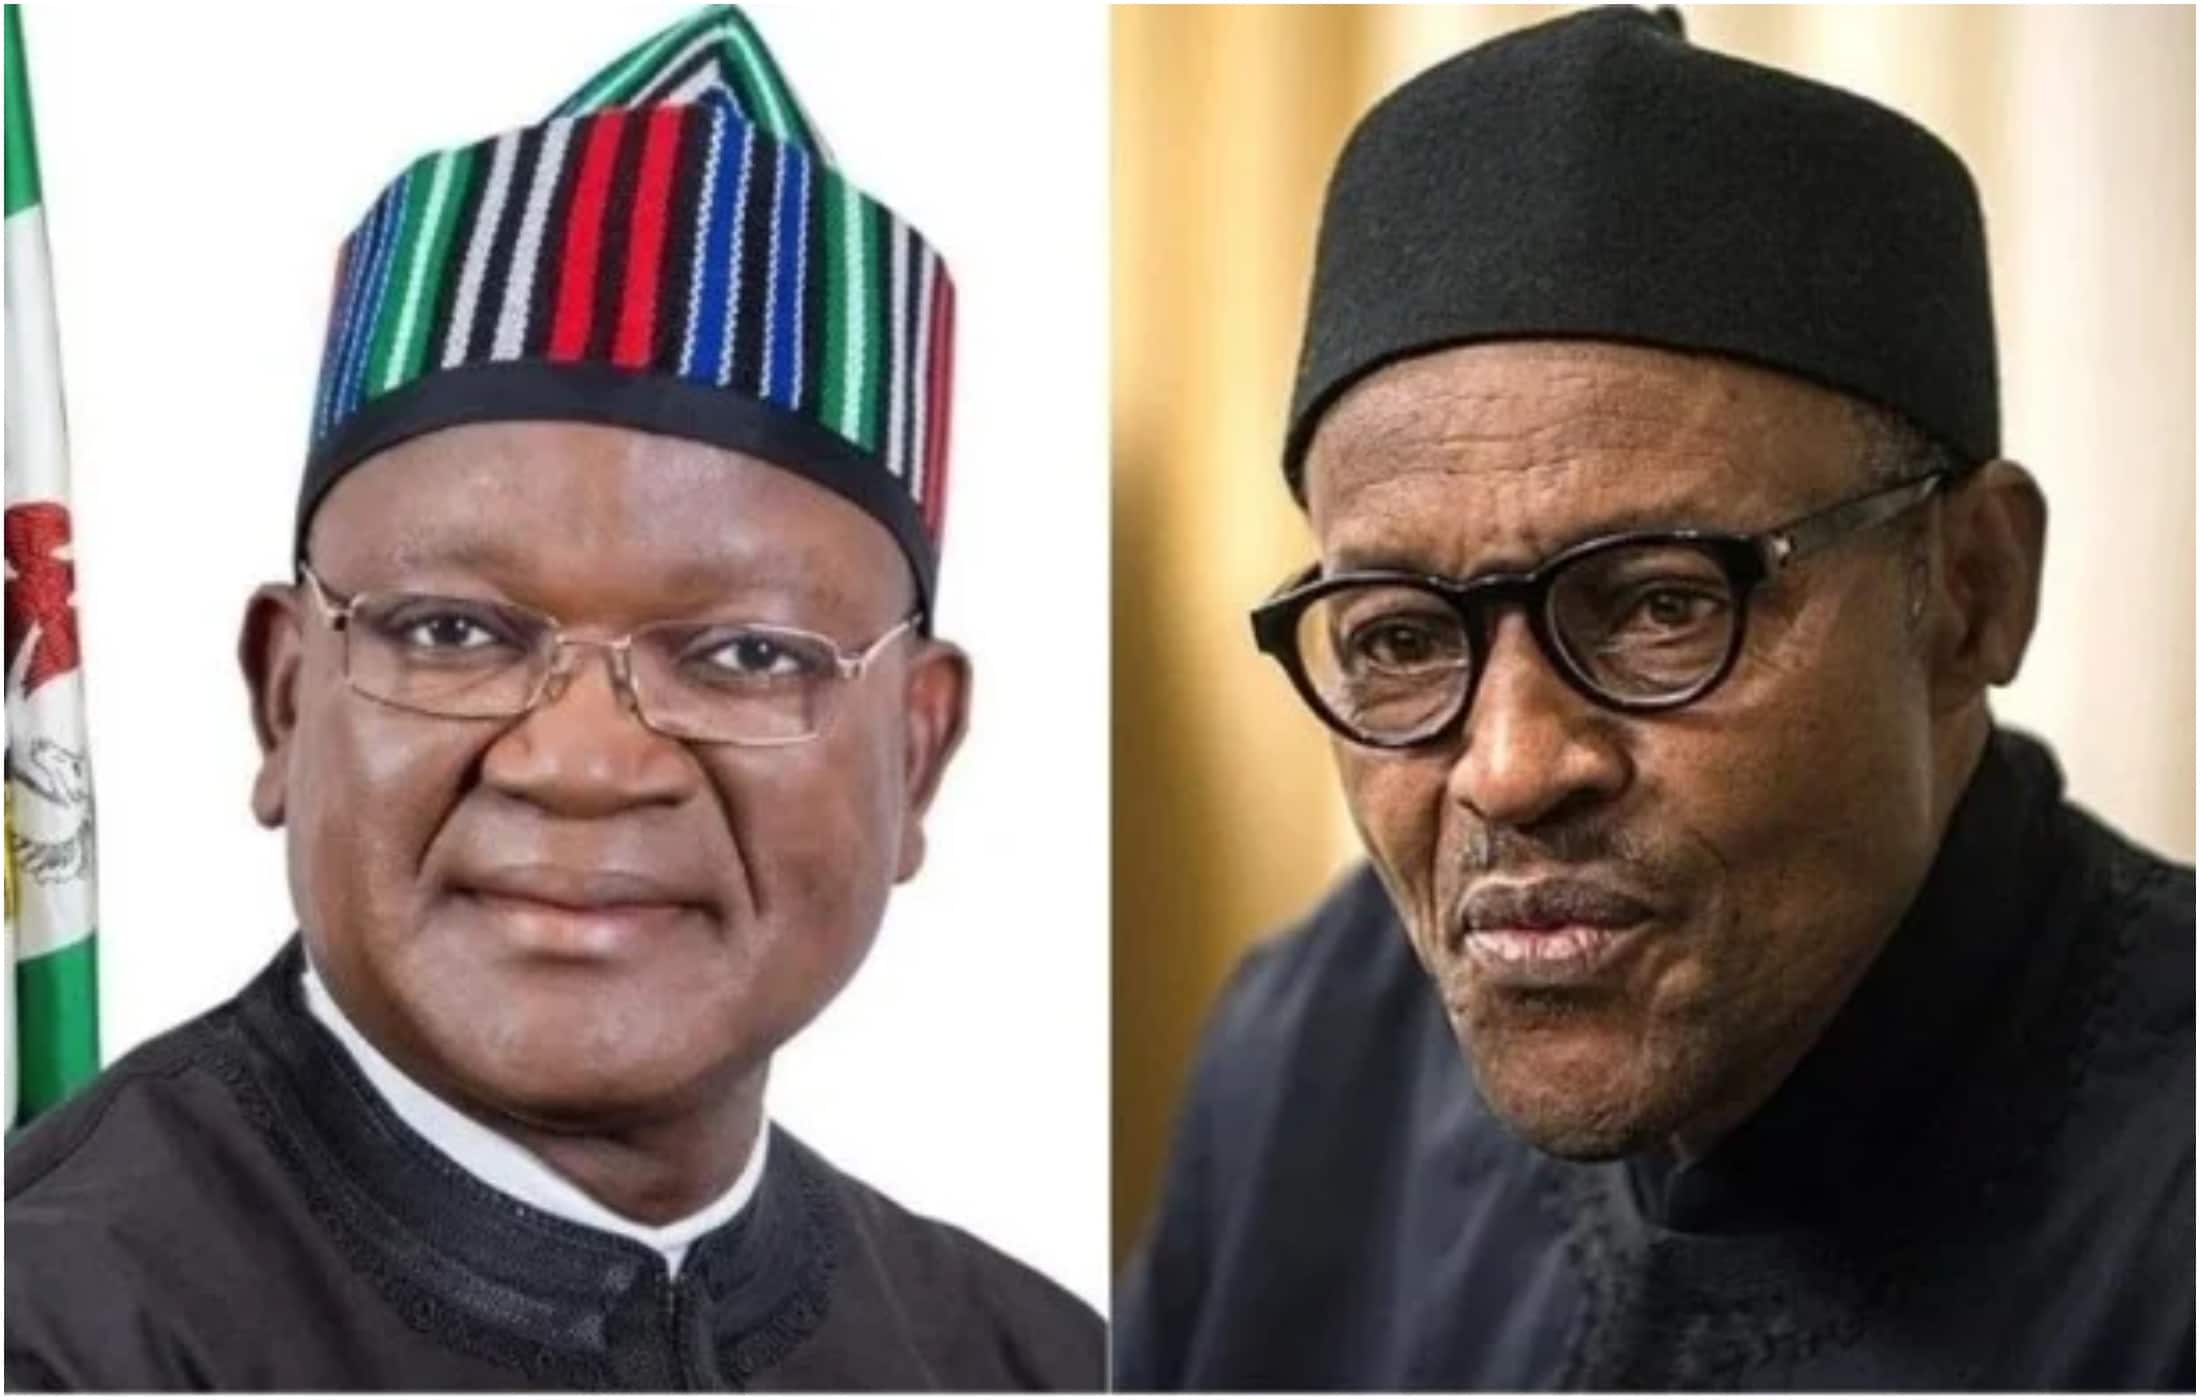 NBC queries Channels TV over Ortom interview on buhari